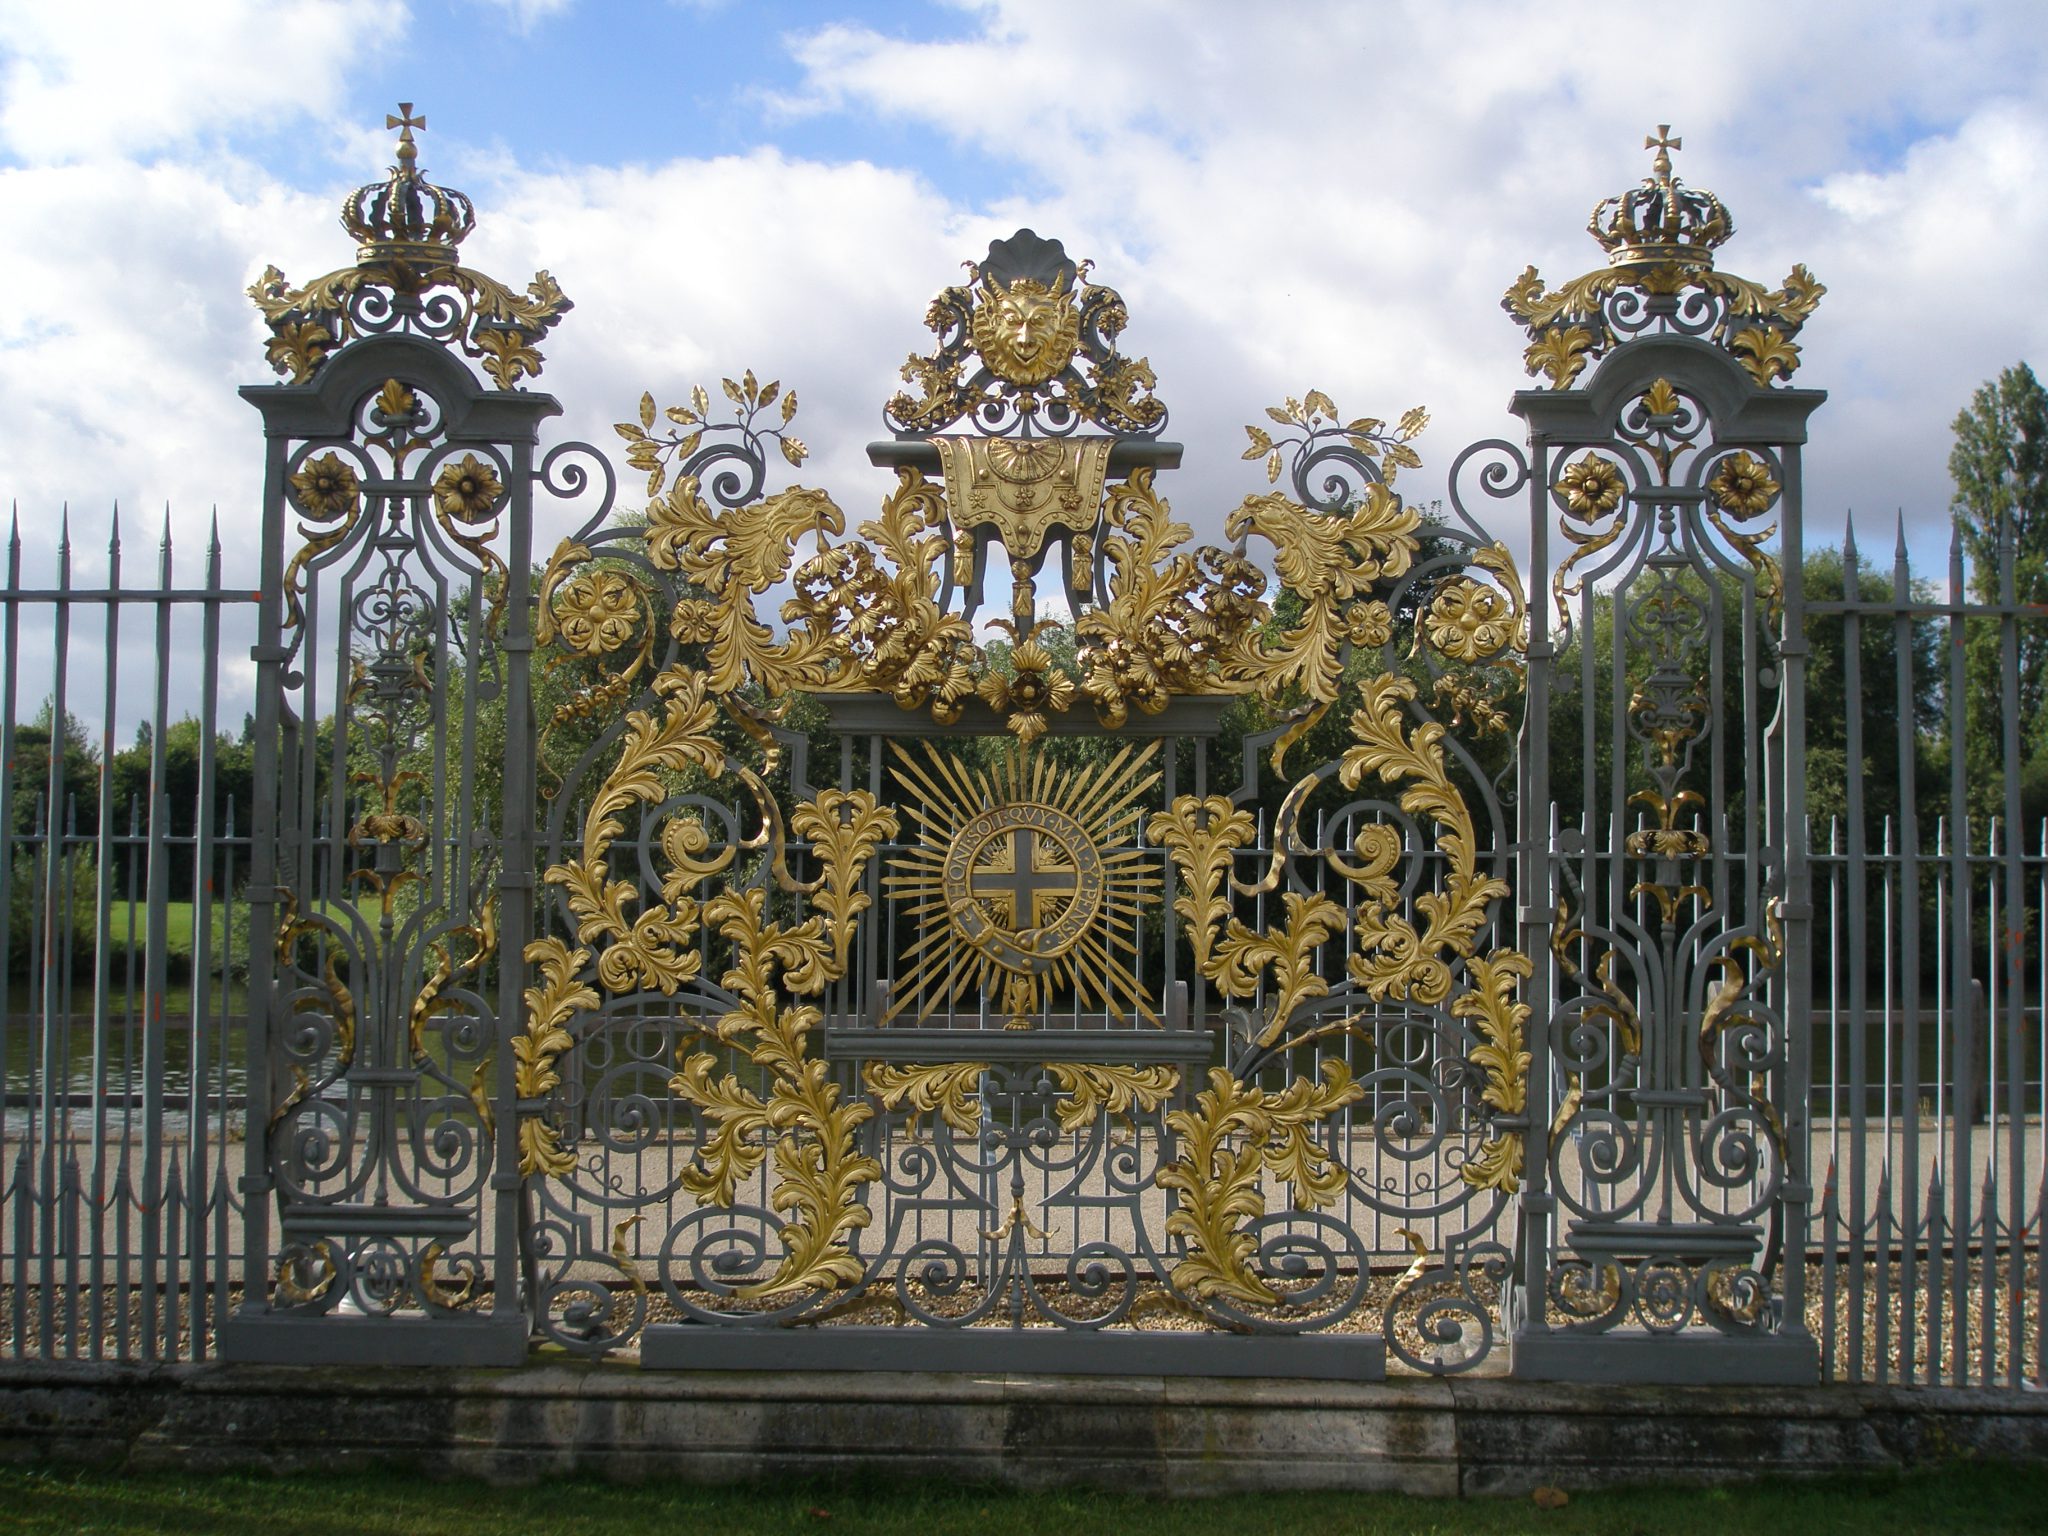 Gate, on the Thames-end of the Privy Garden. This ironwork was designed for William III by Jean Tijou, a French master blacksmith.